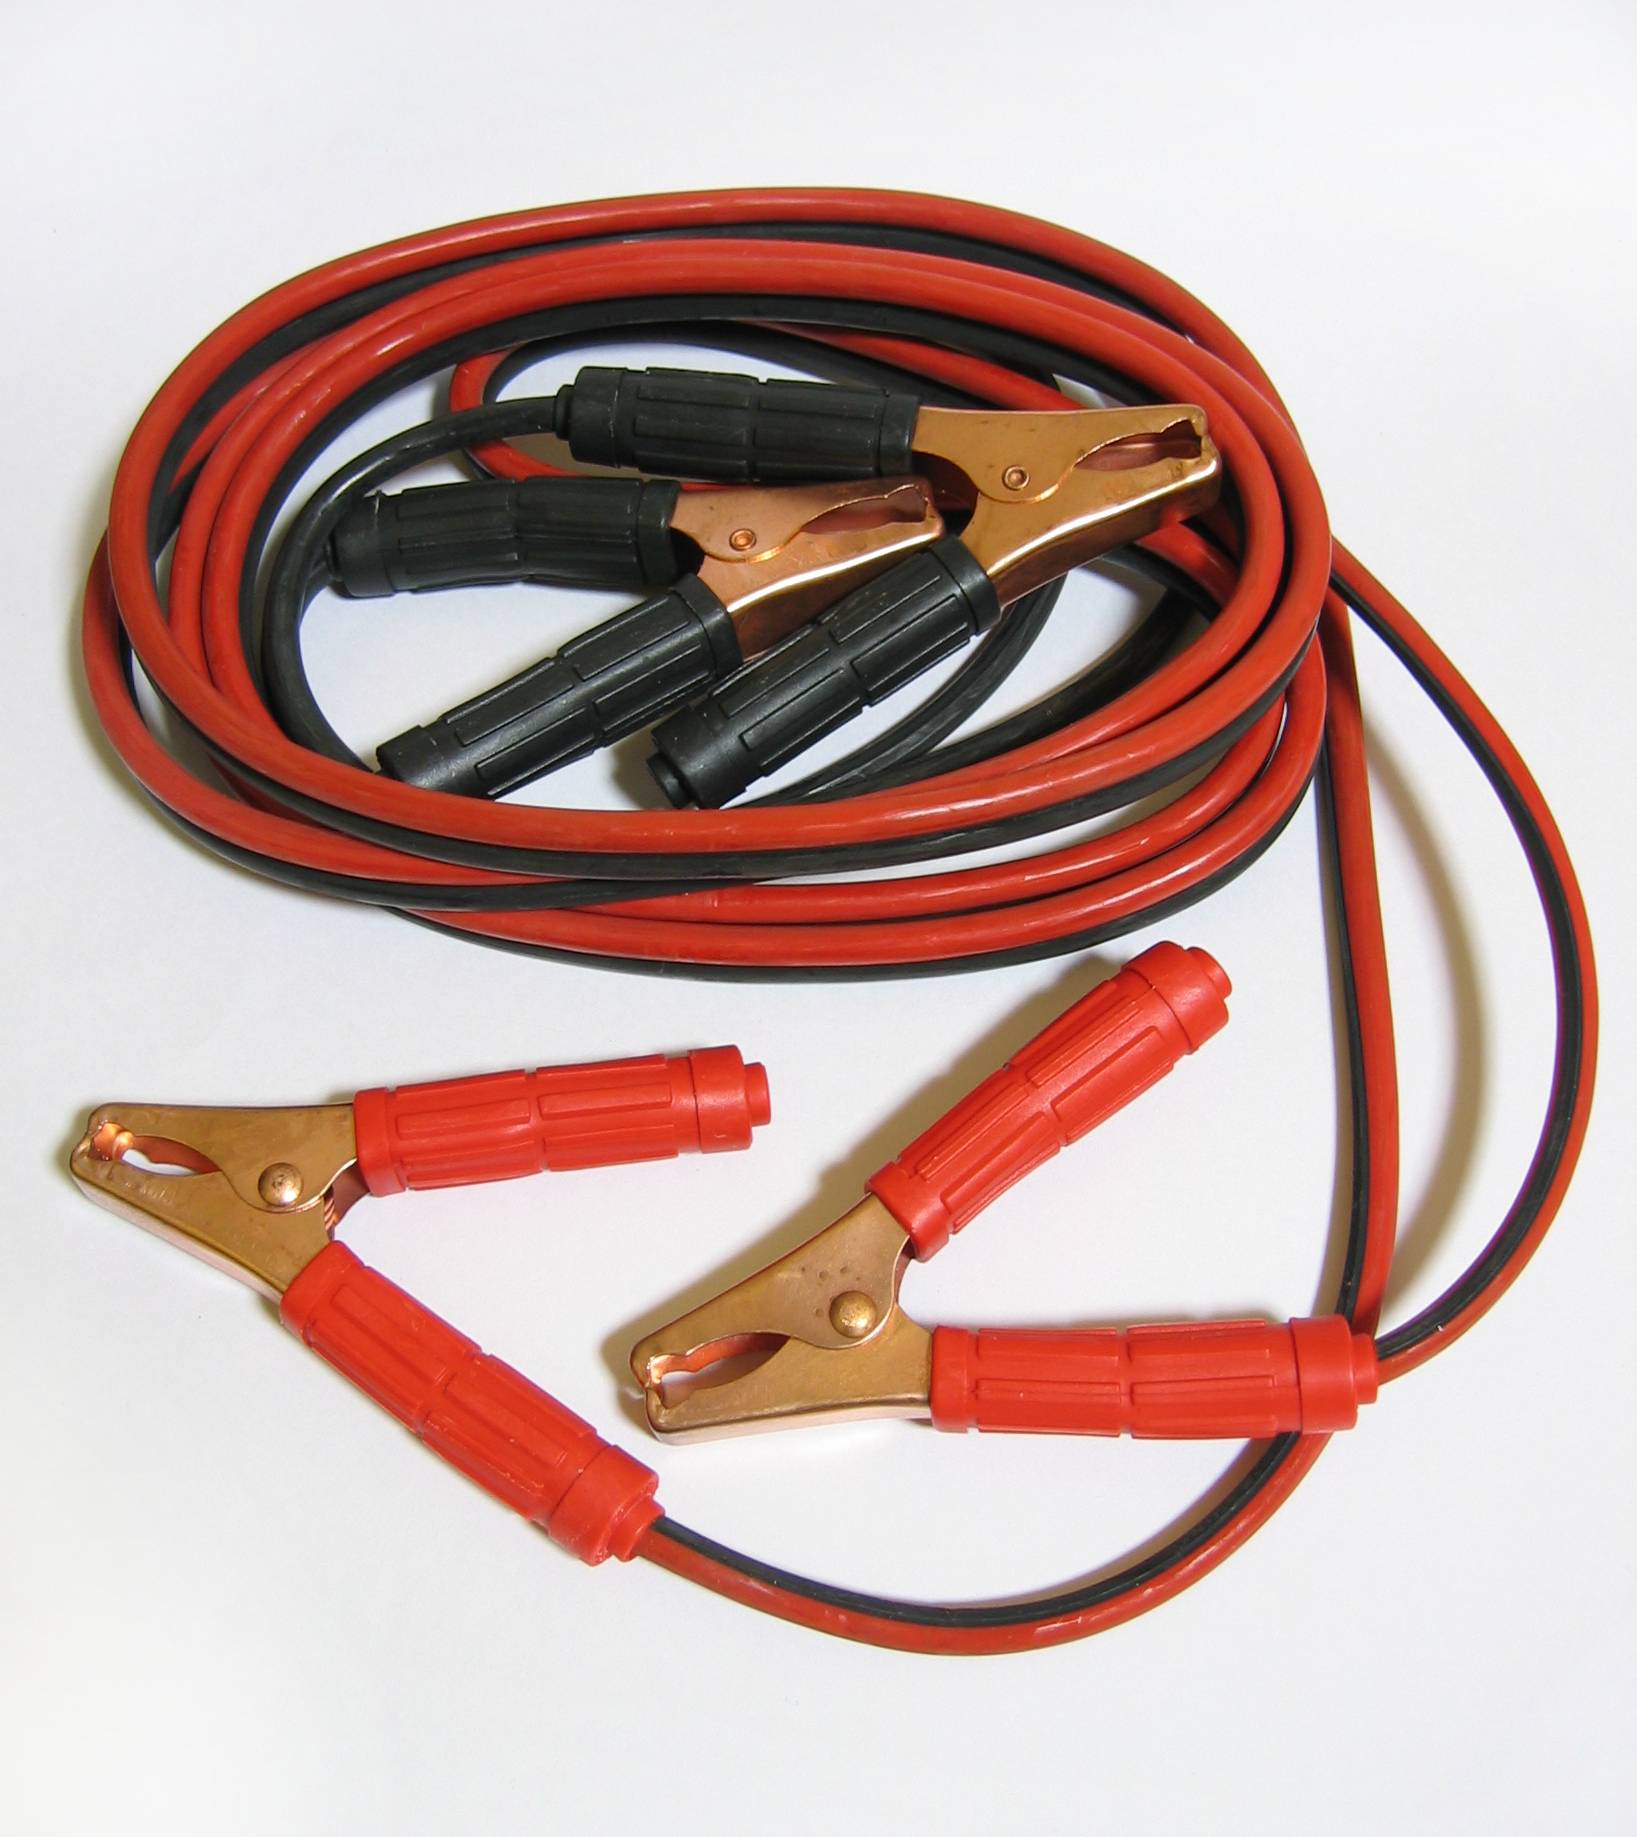 A set of red and black jumper cables.